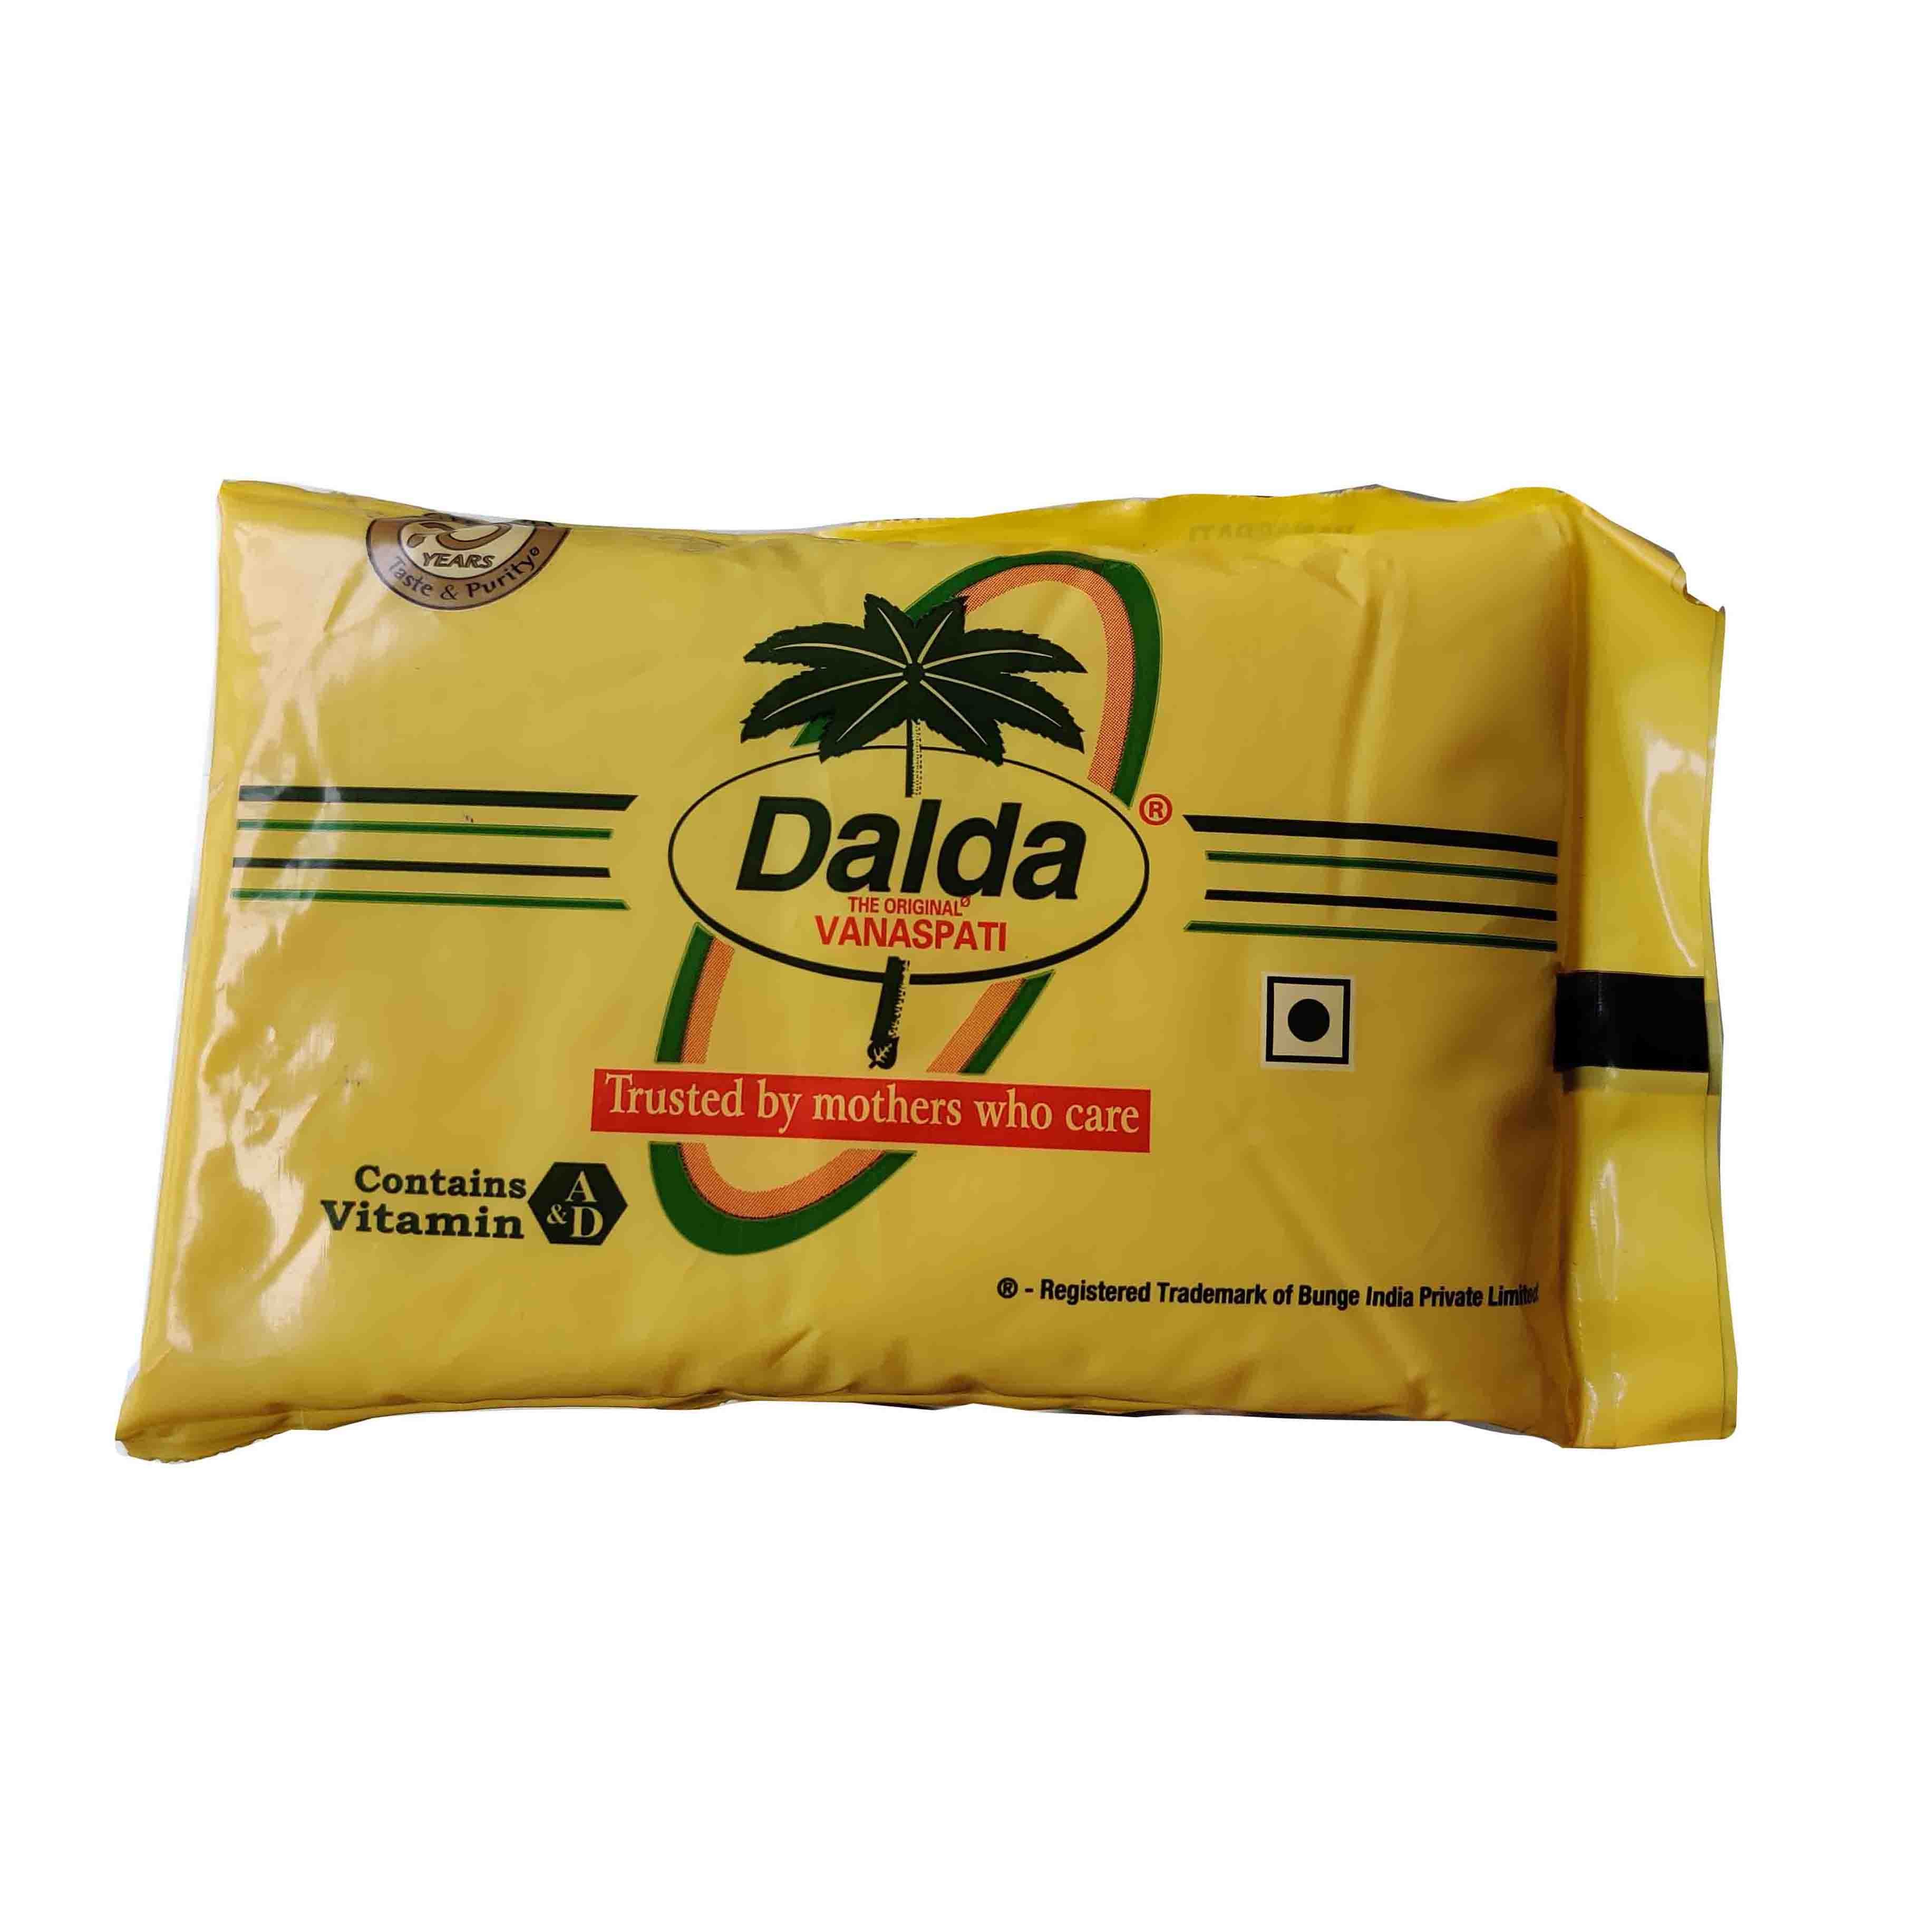 Dalda Vegetable Oil - Pouch Pack of 200ml - P/C * 3267